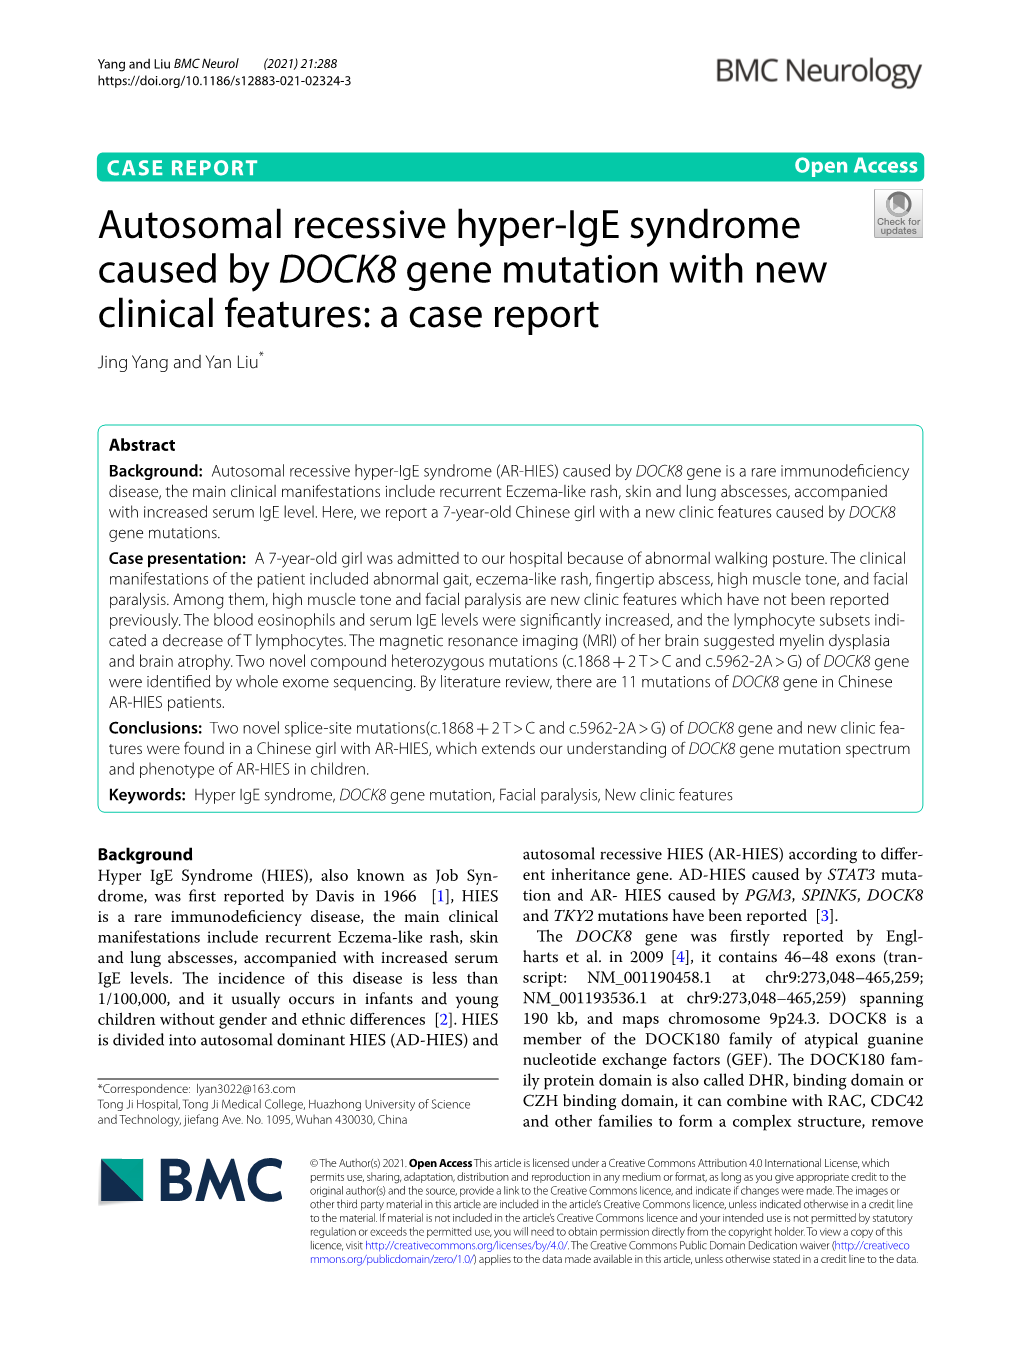 Autosomal Recessive Hyper-Ige Syndrome Caused By